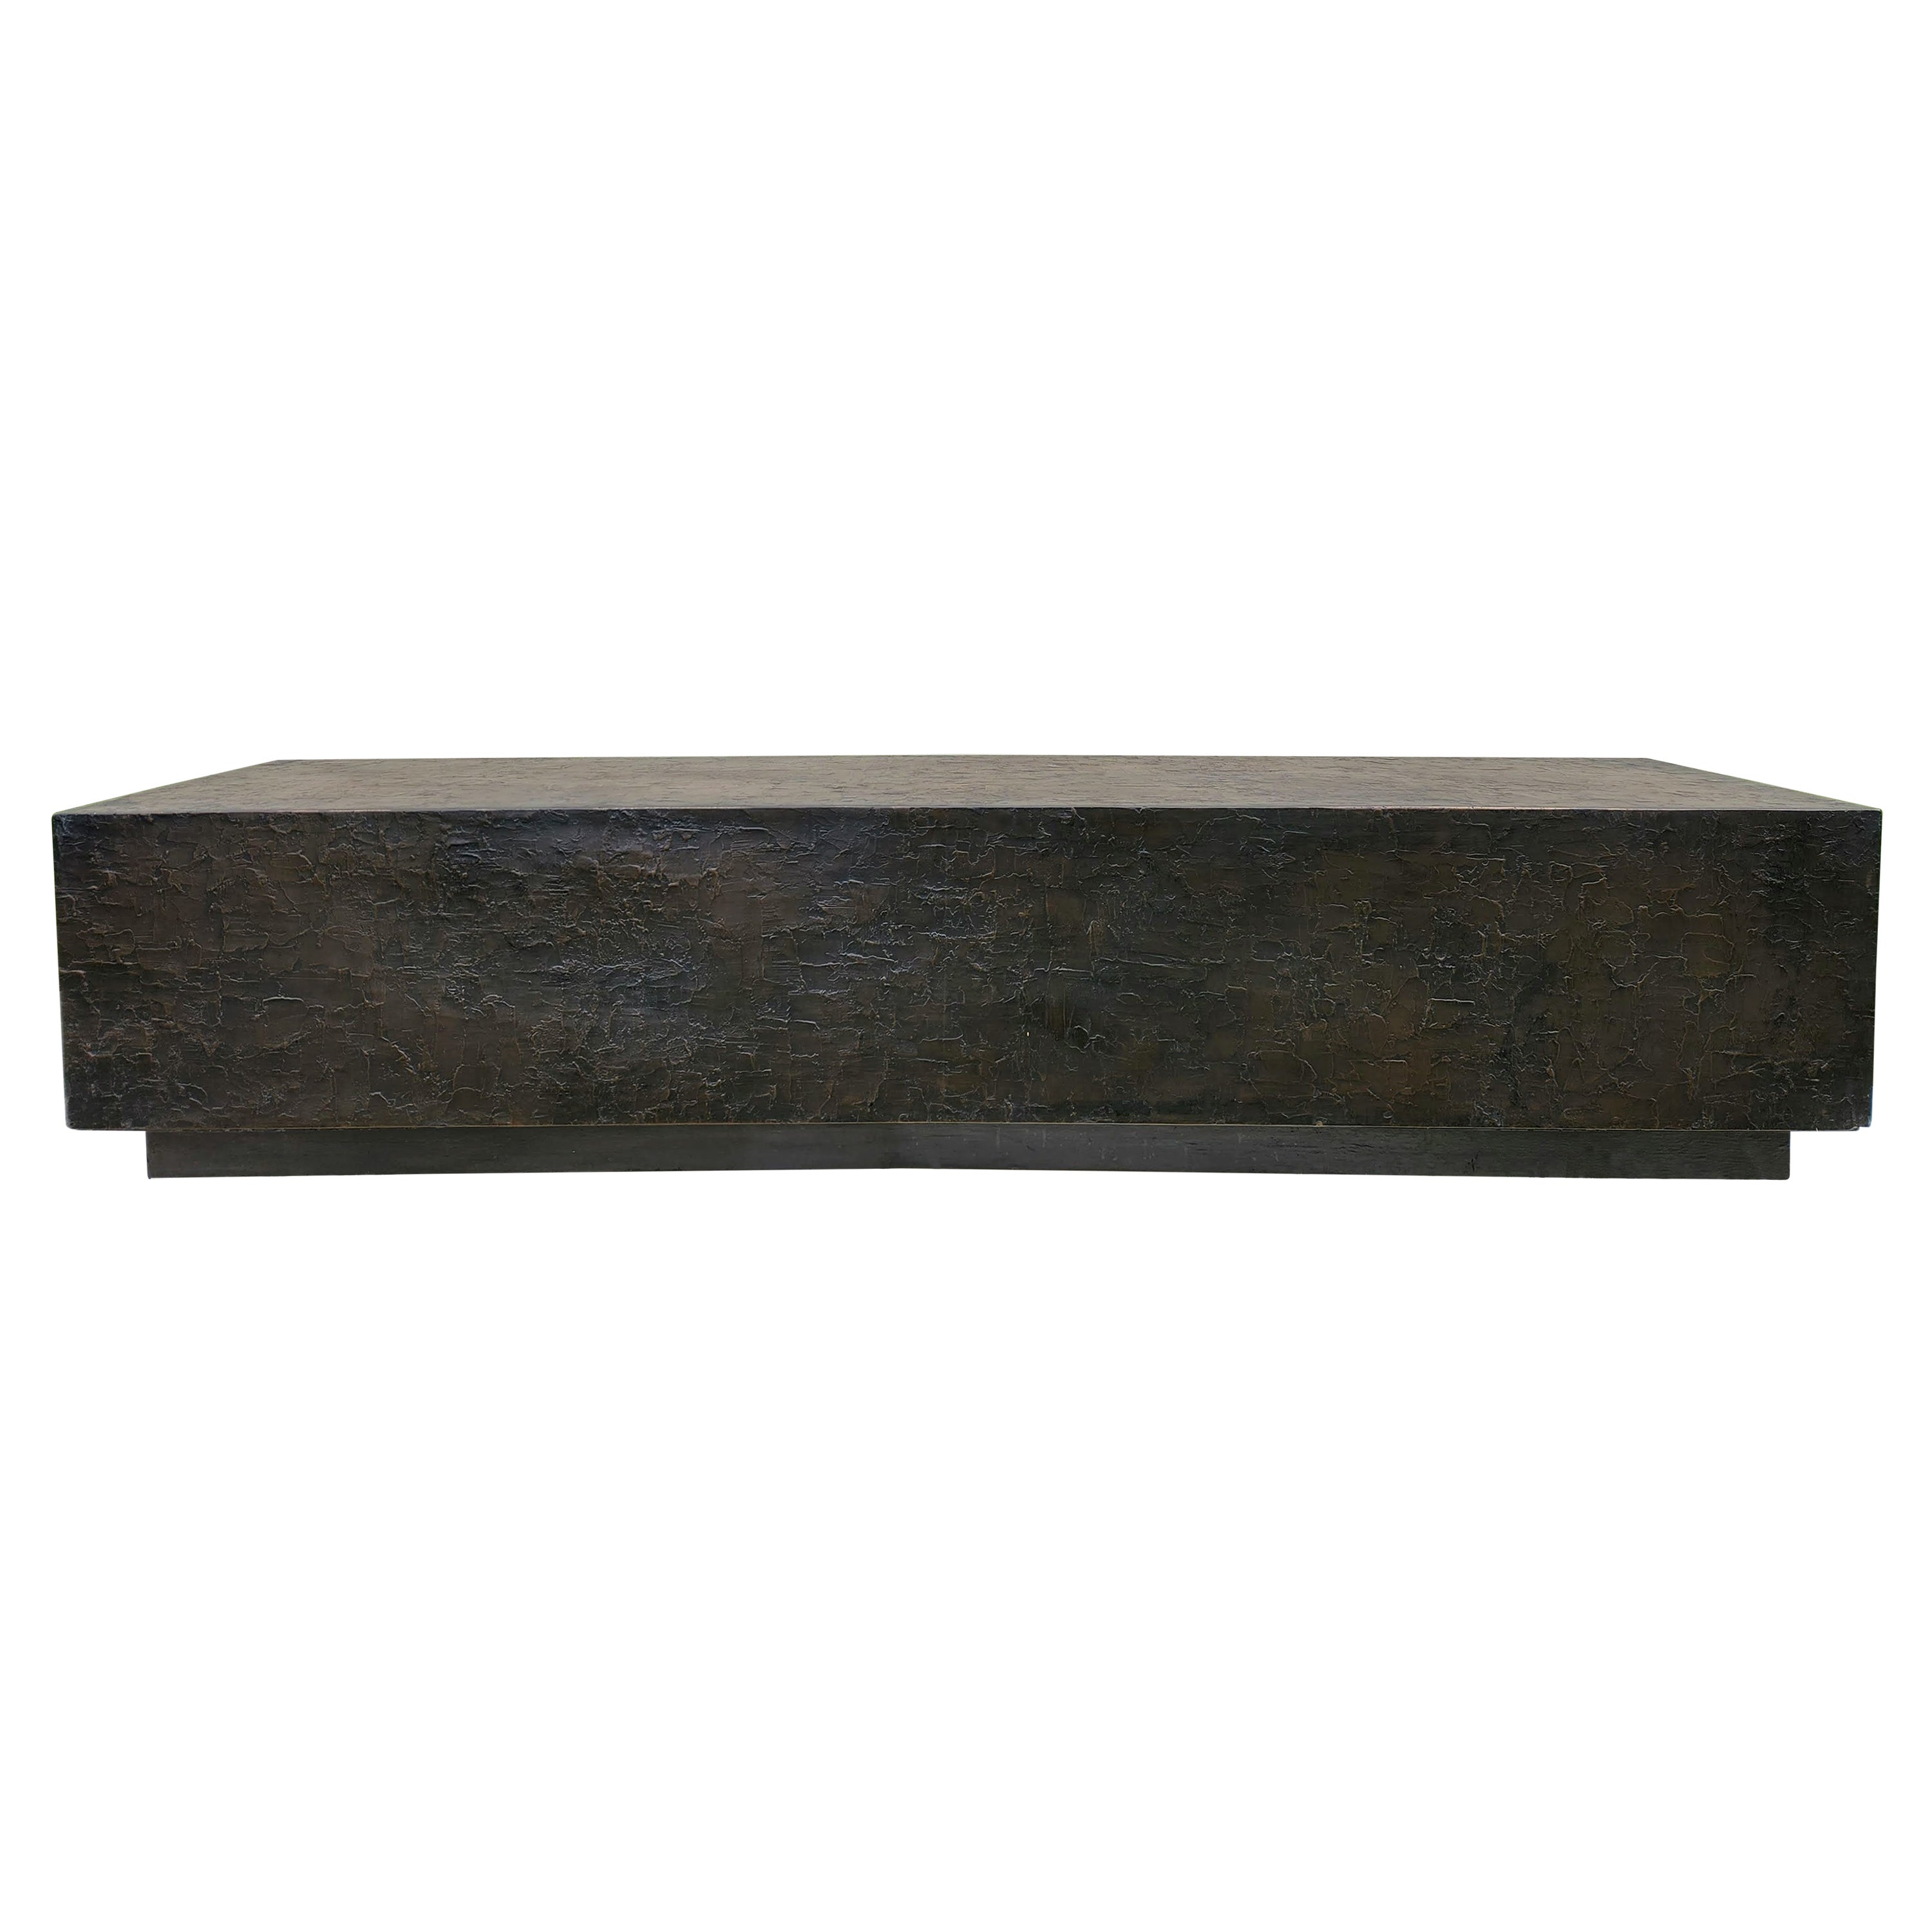 Forms and Surfaces Cast Bronze Sheathed Bench, California, 1960s-1970s For Sale